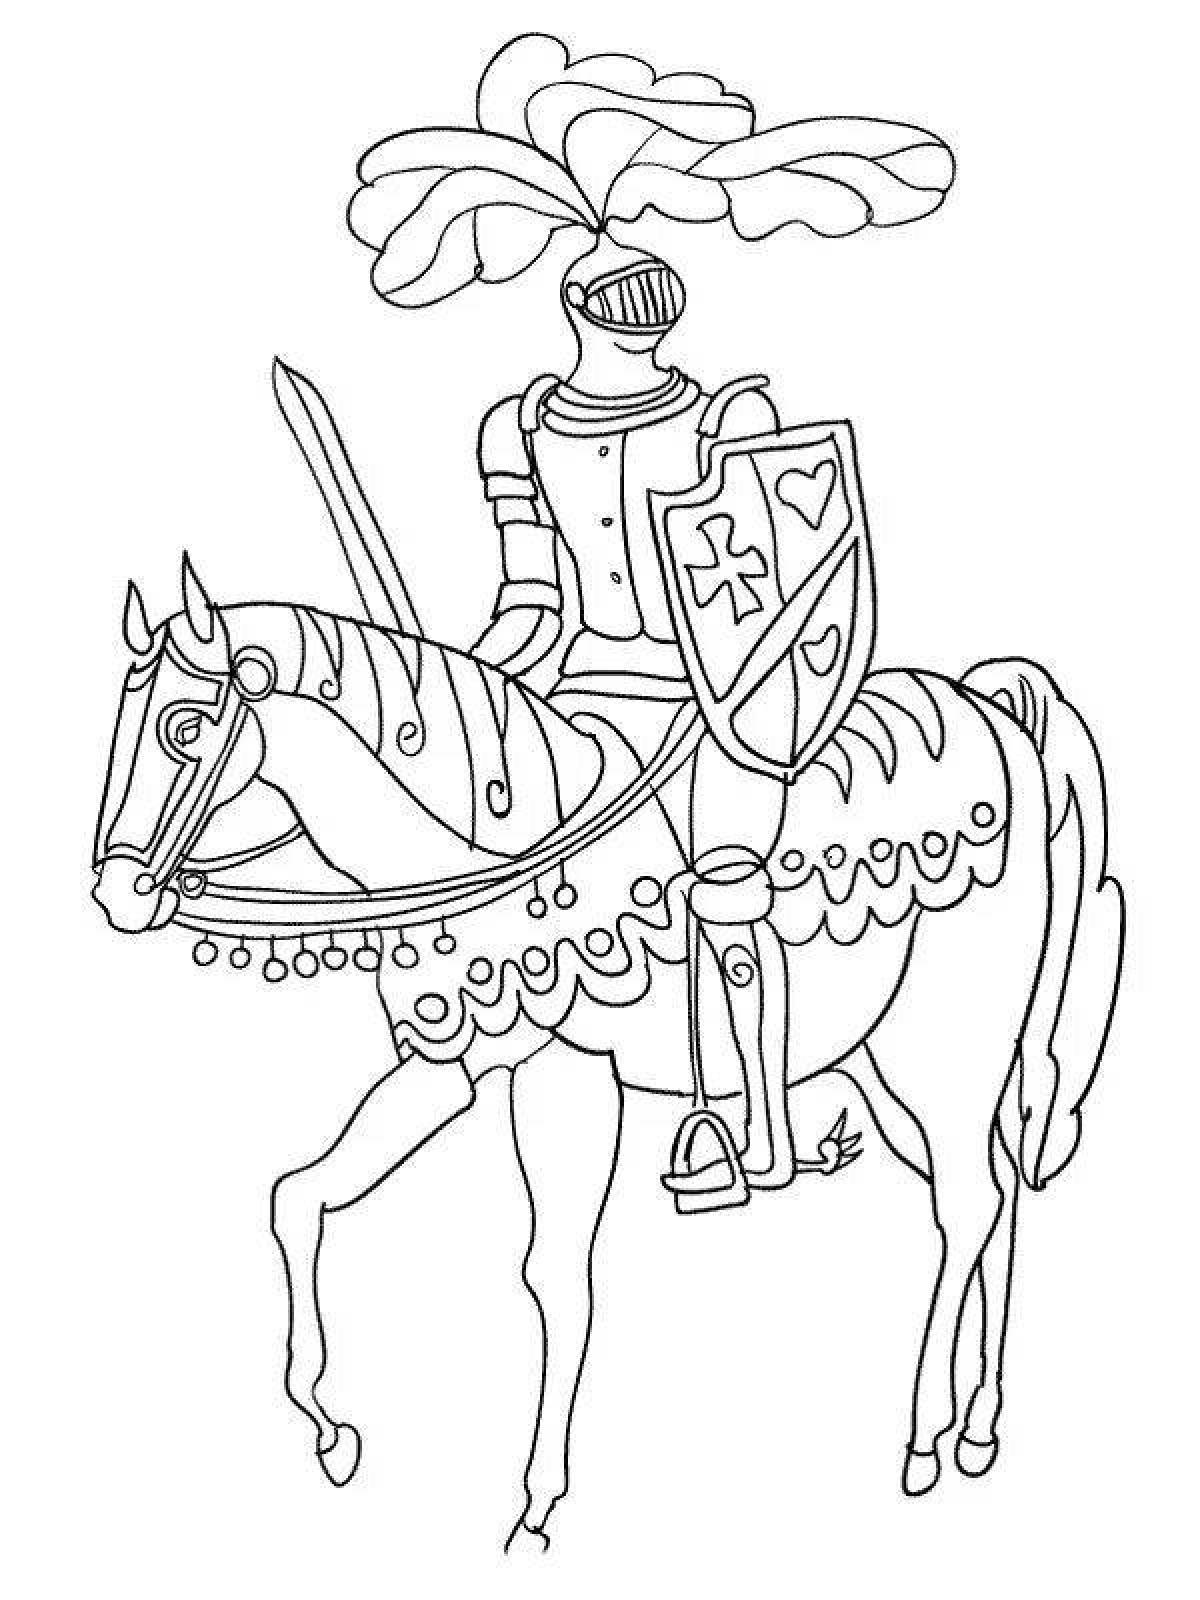 Ornate medieval knights coloring book